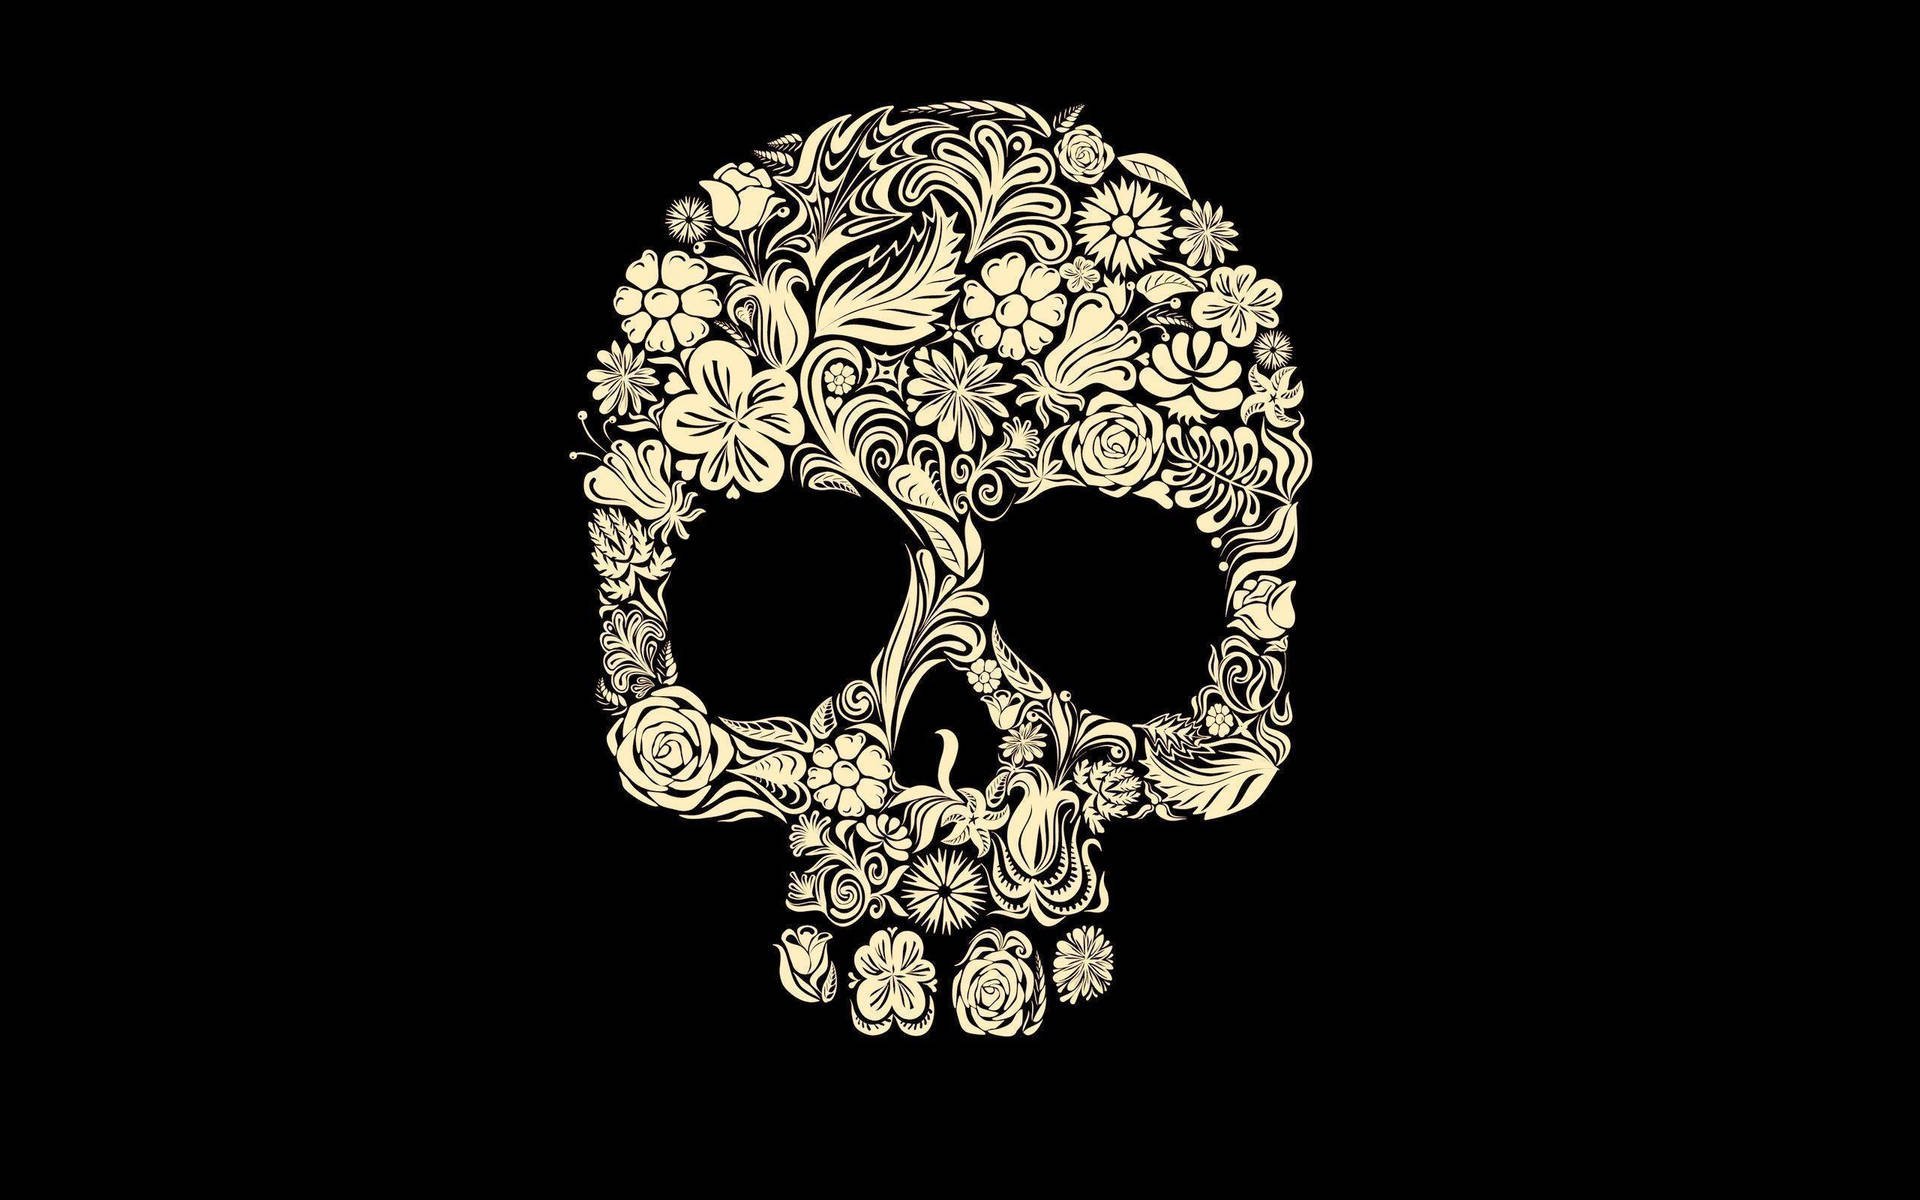 A Skull With Floral Designs On A Black Background